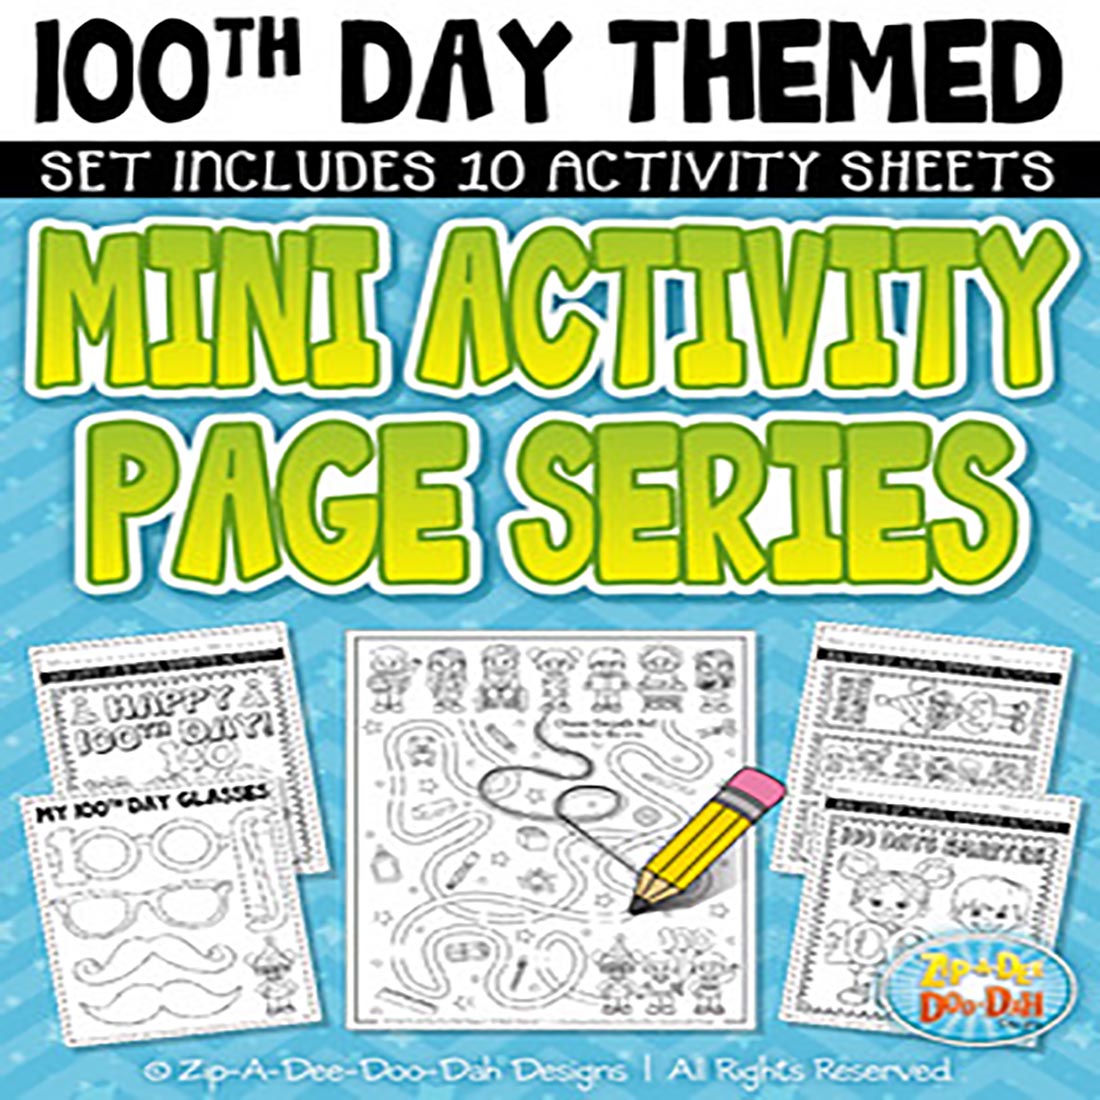 100th Day Mini Activity Page Series Pack {Zip-A-Dee-Doo-Dah Designs} preview image.